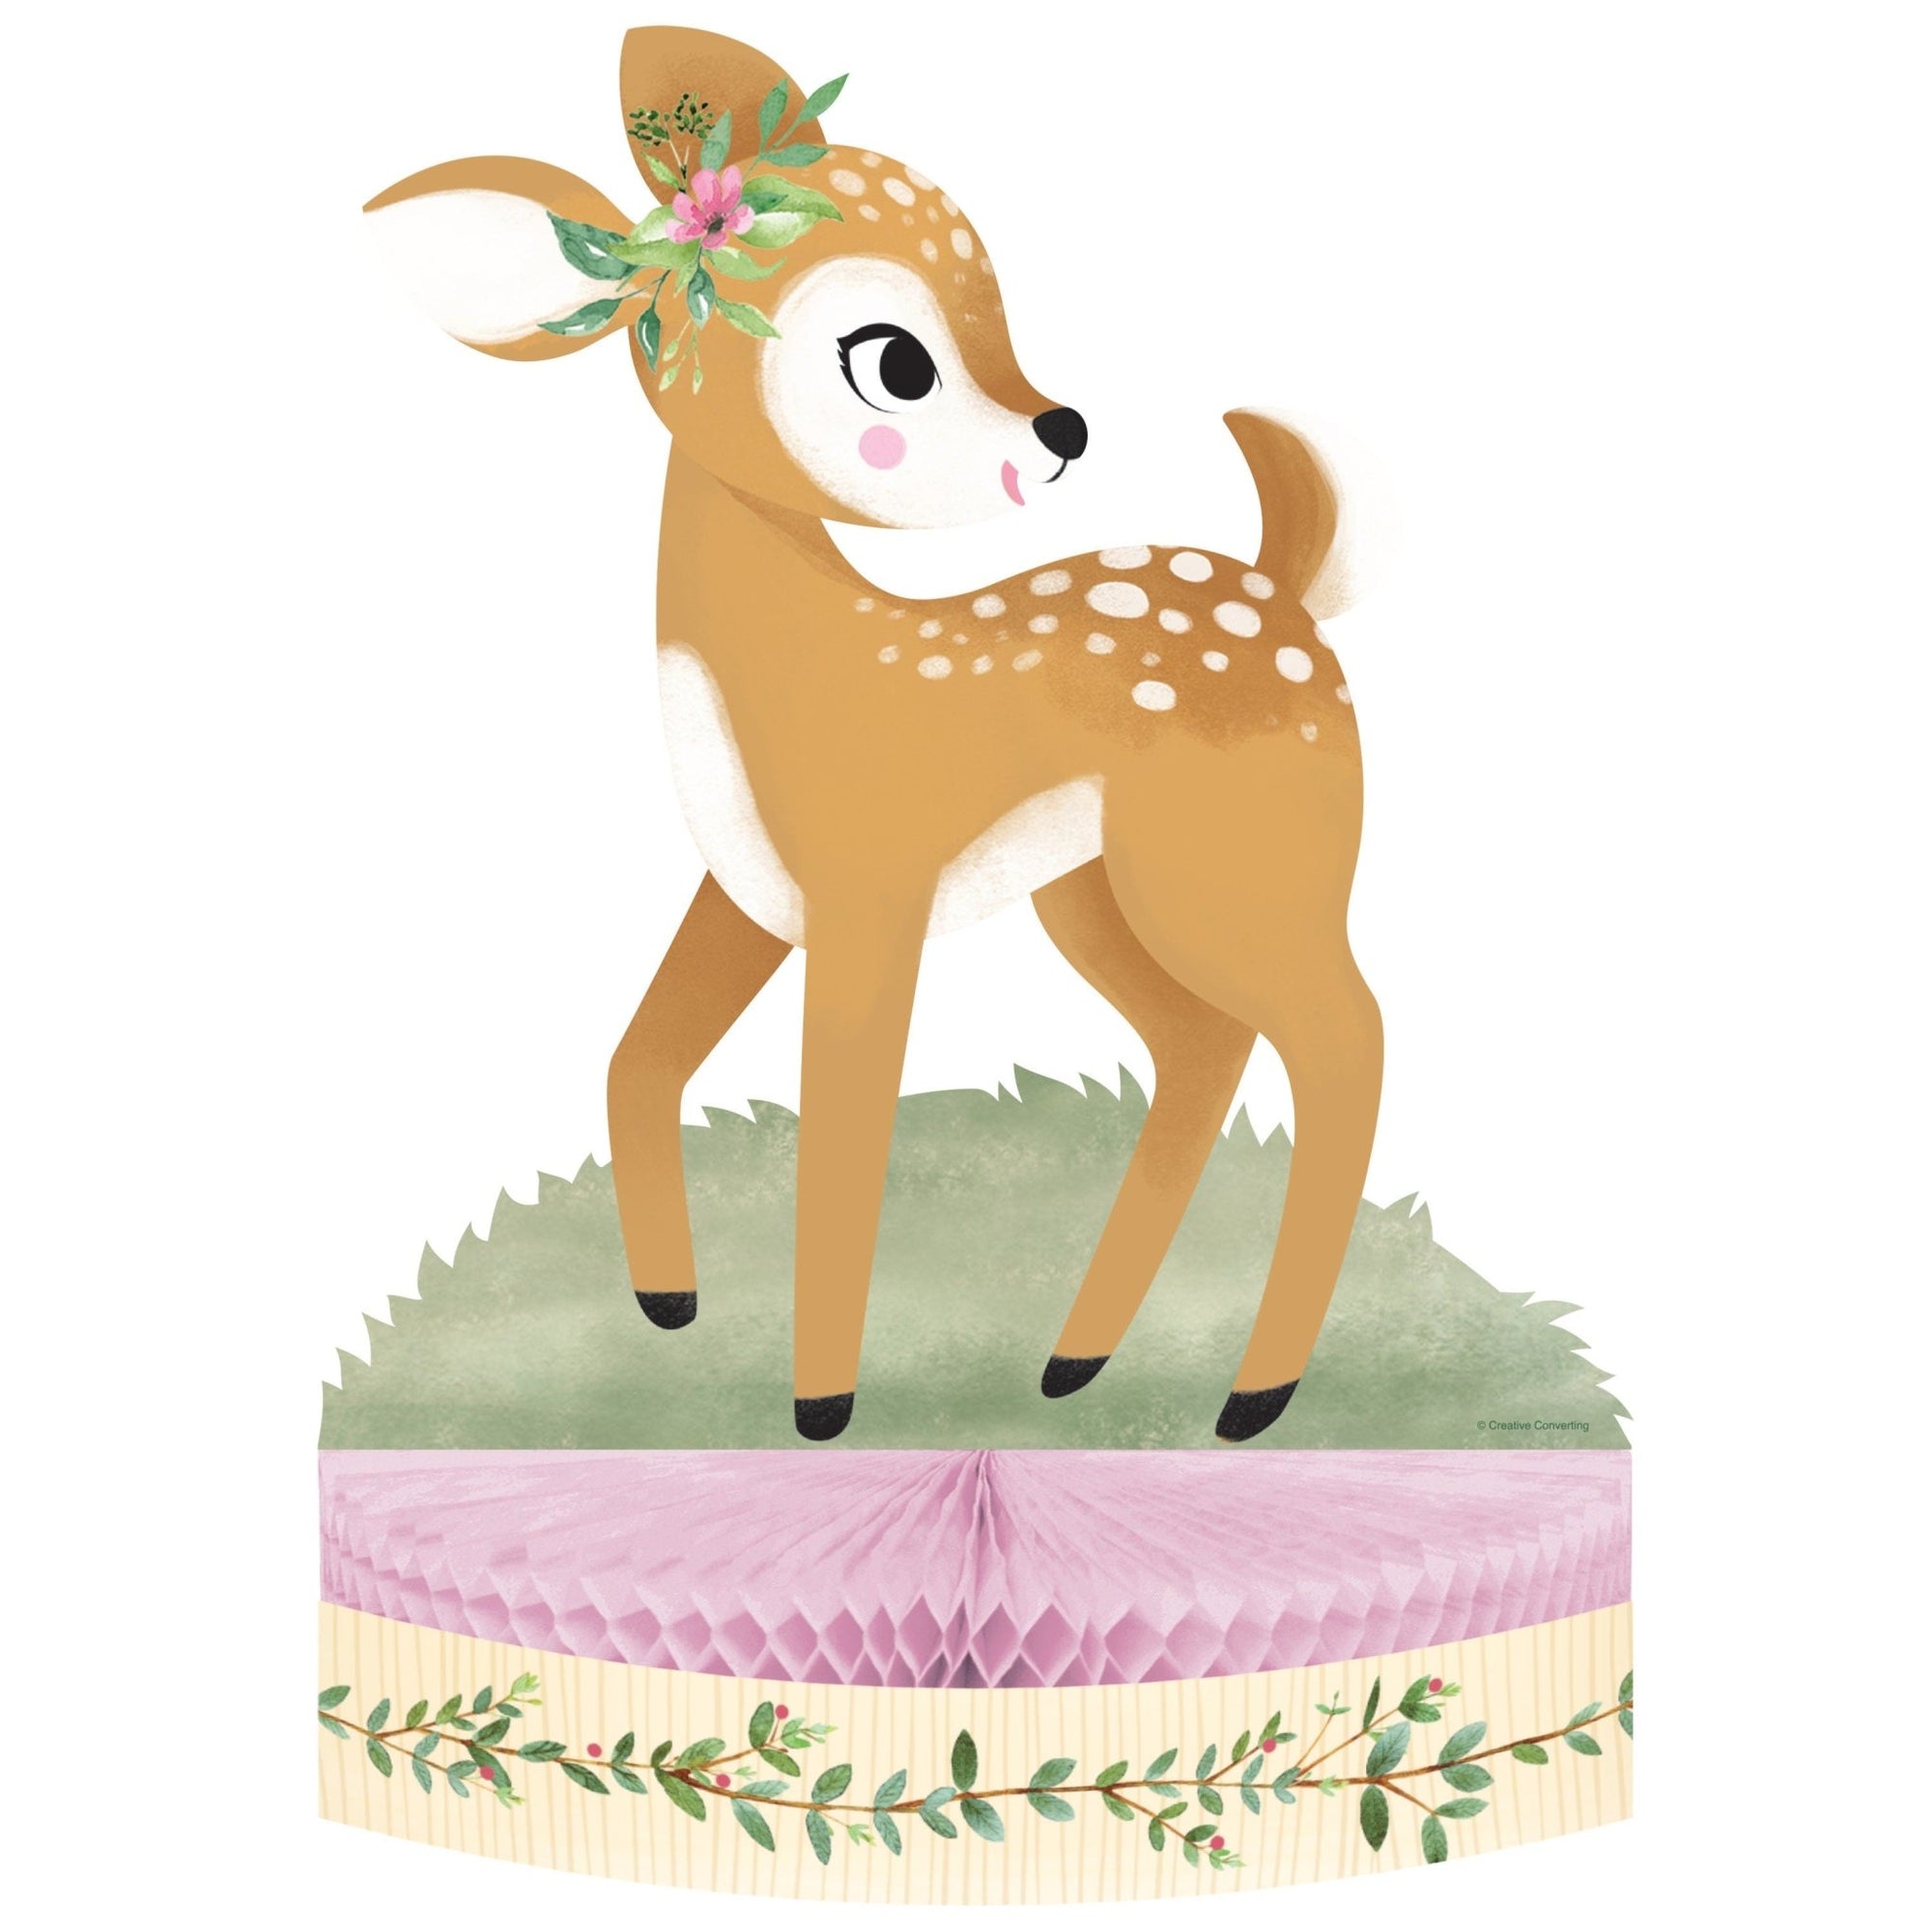 Deer Party Centerpiece - Stesha Party